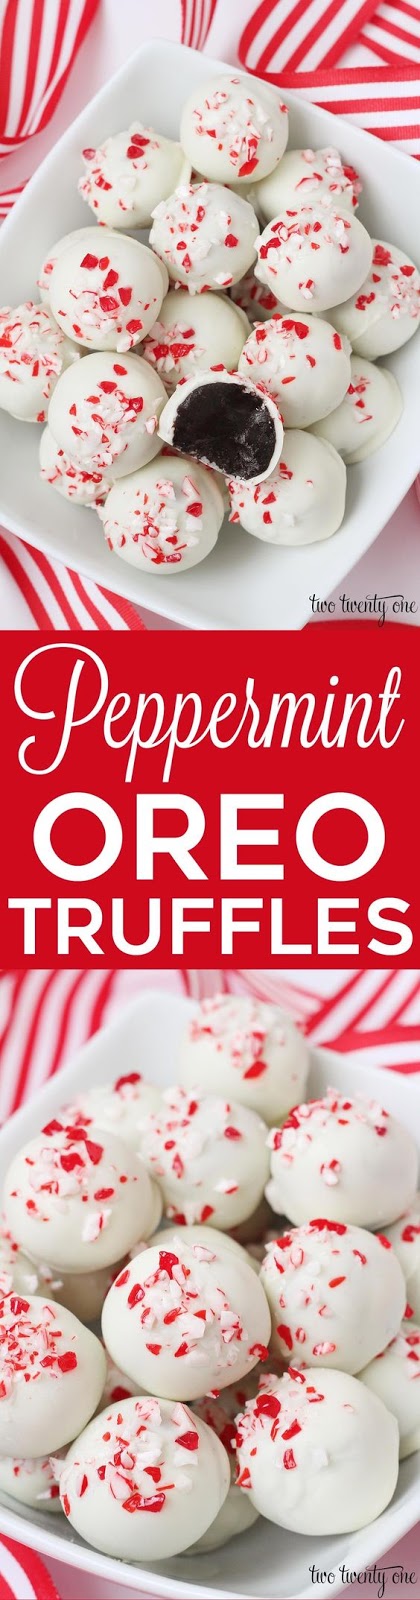 These peppermint Oreo truffles are incredibly delcious and easy to make-- only Oreos, cream cheese, peppermint extract, and chocolate-- no baking!